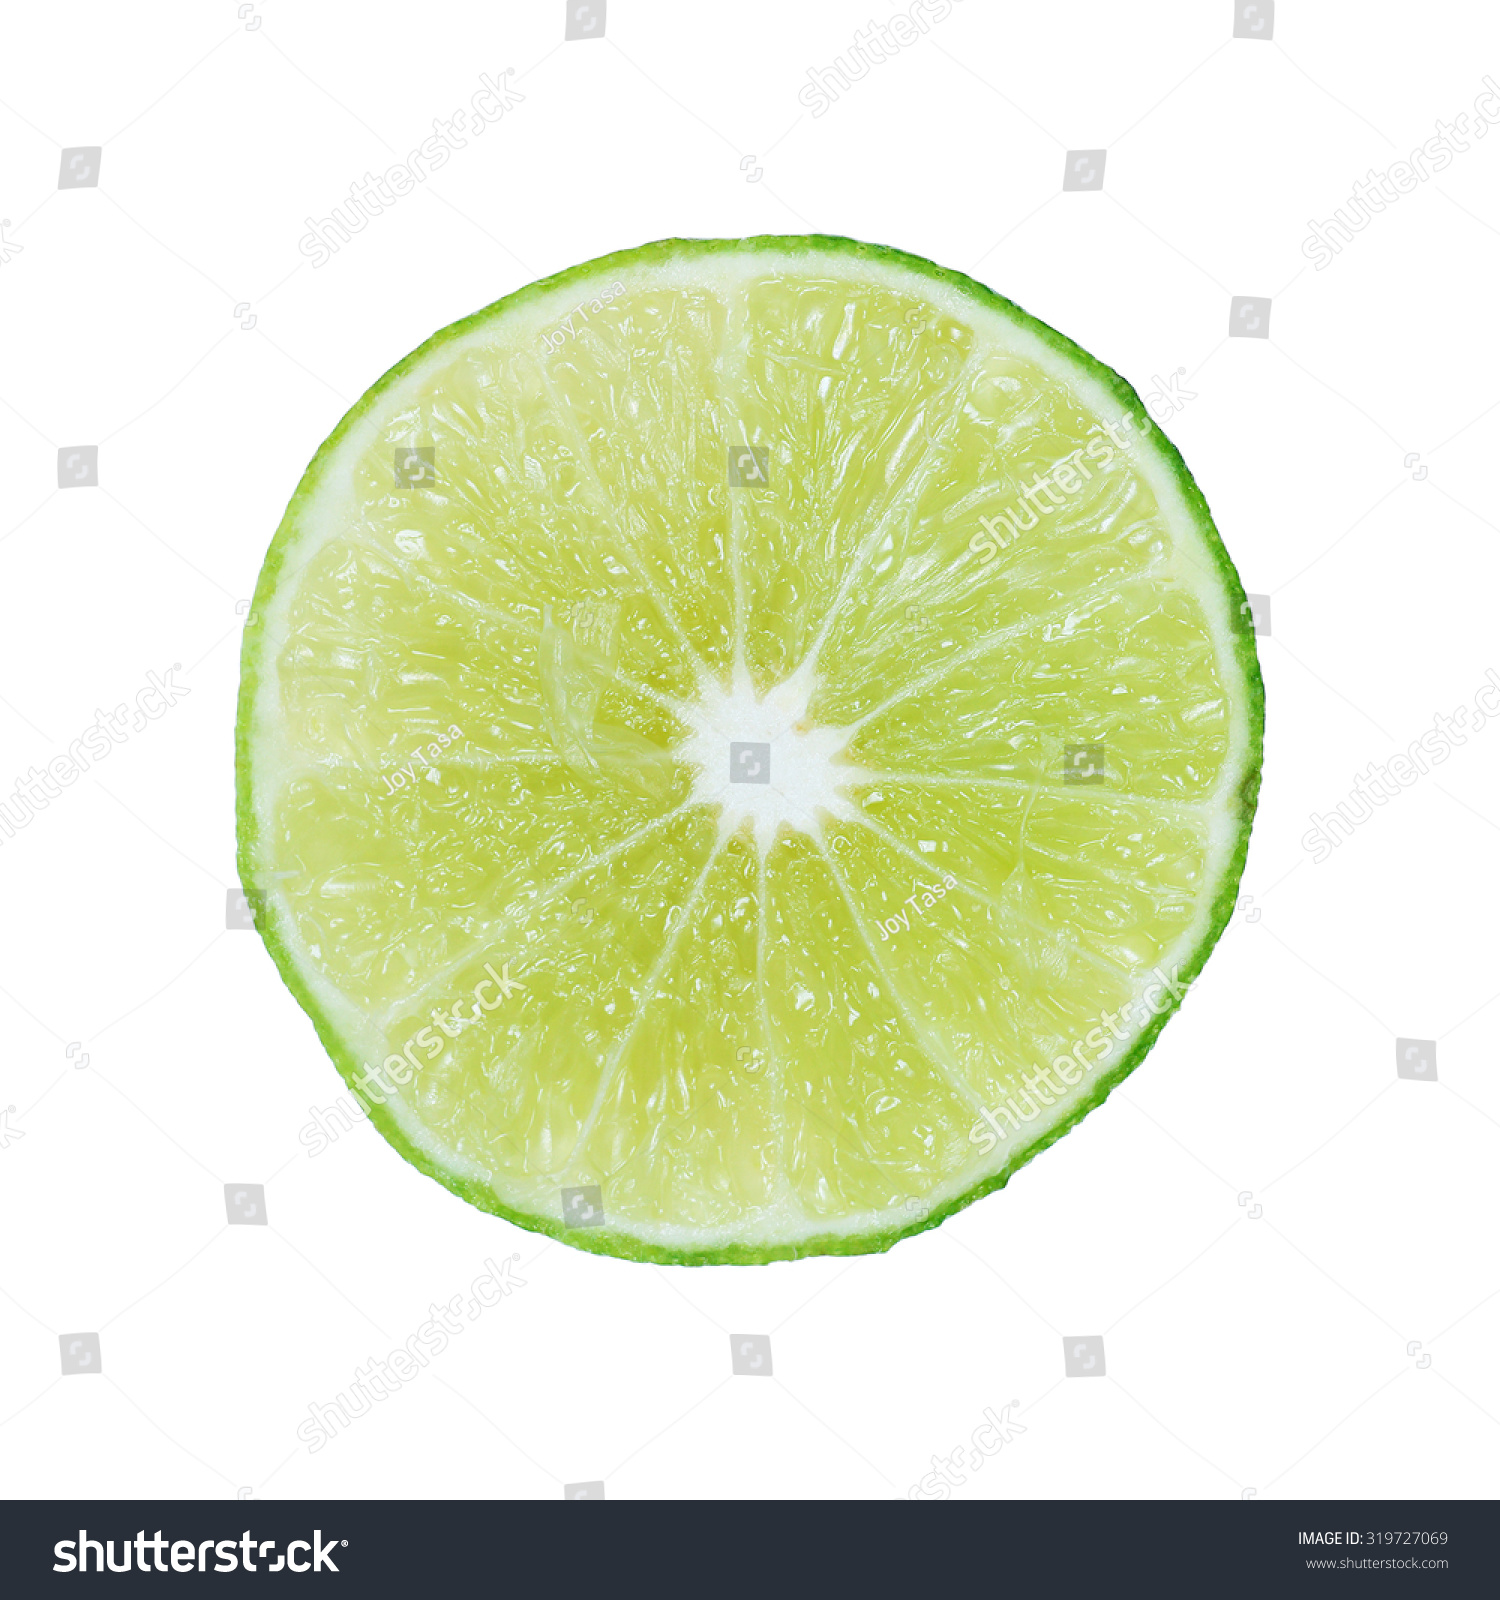 It is Half sliced lime isolated on white. #319727069